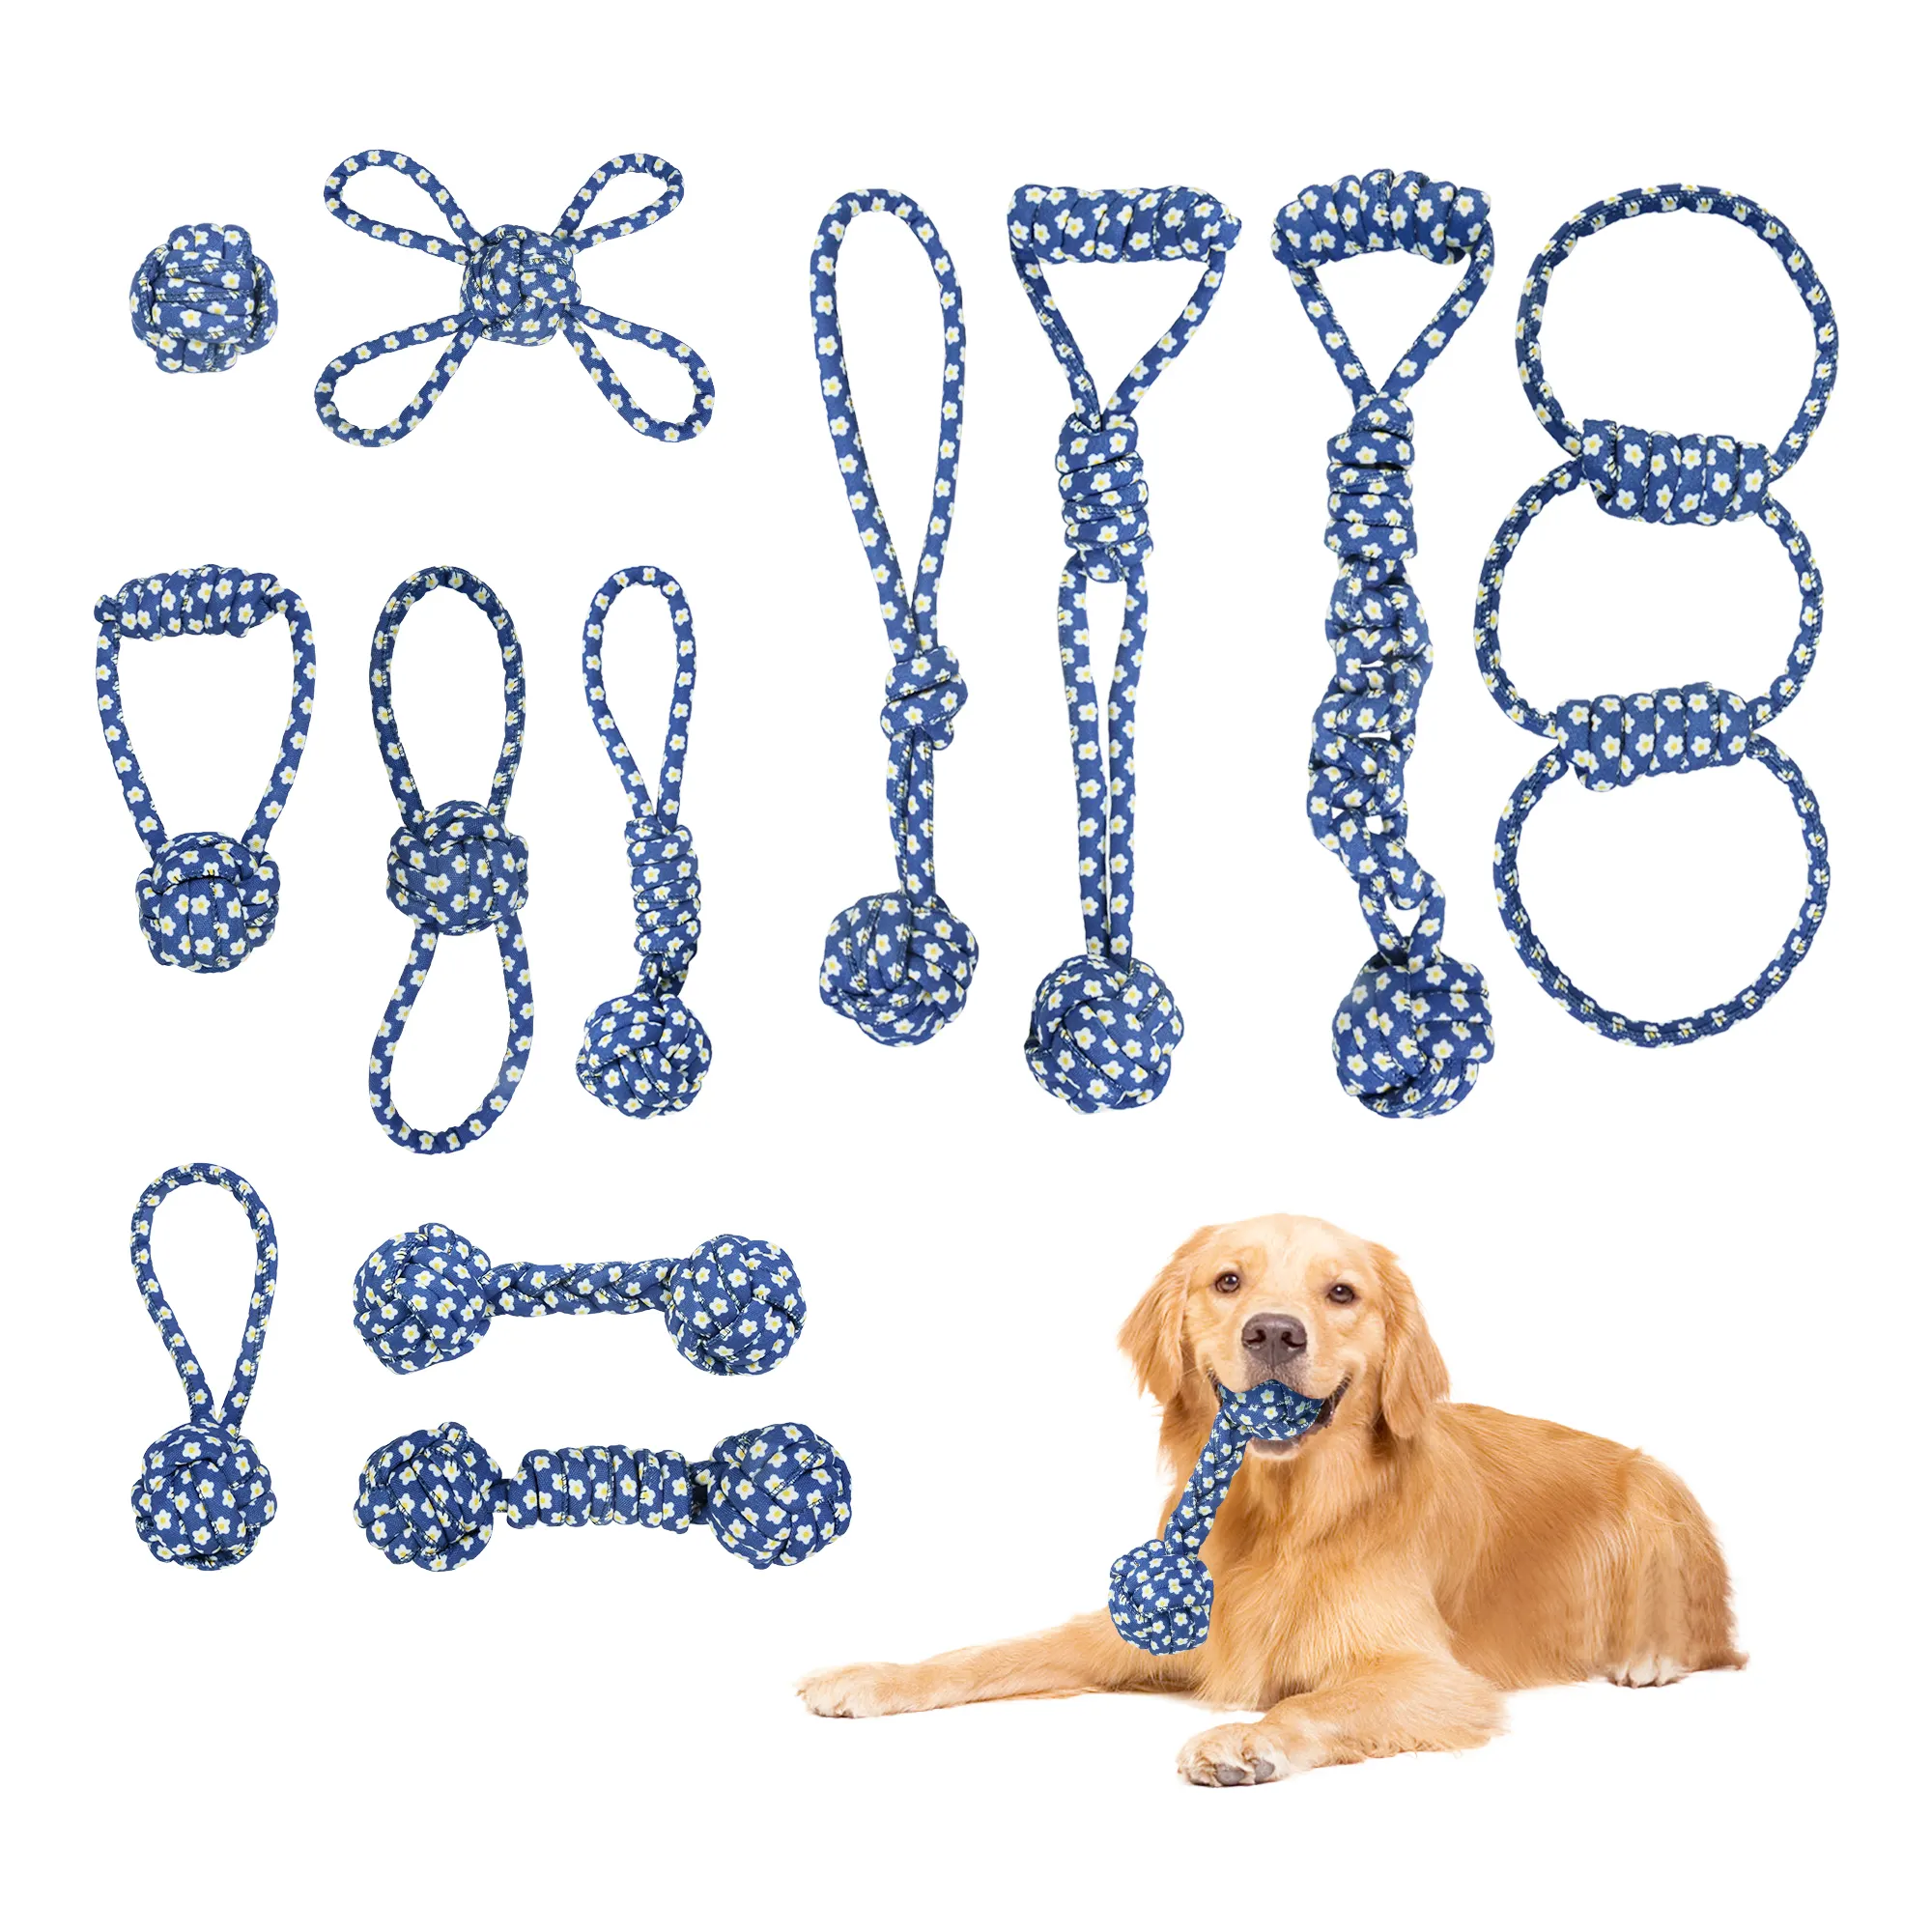 C4P customize pattern print cotton rope bite resistant toy rope dog toy